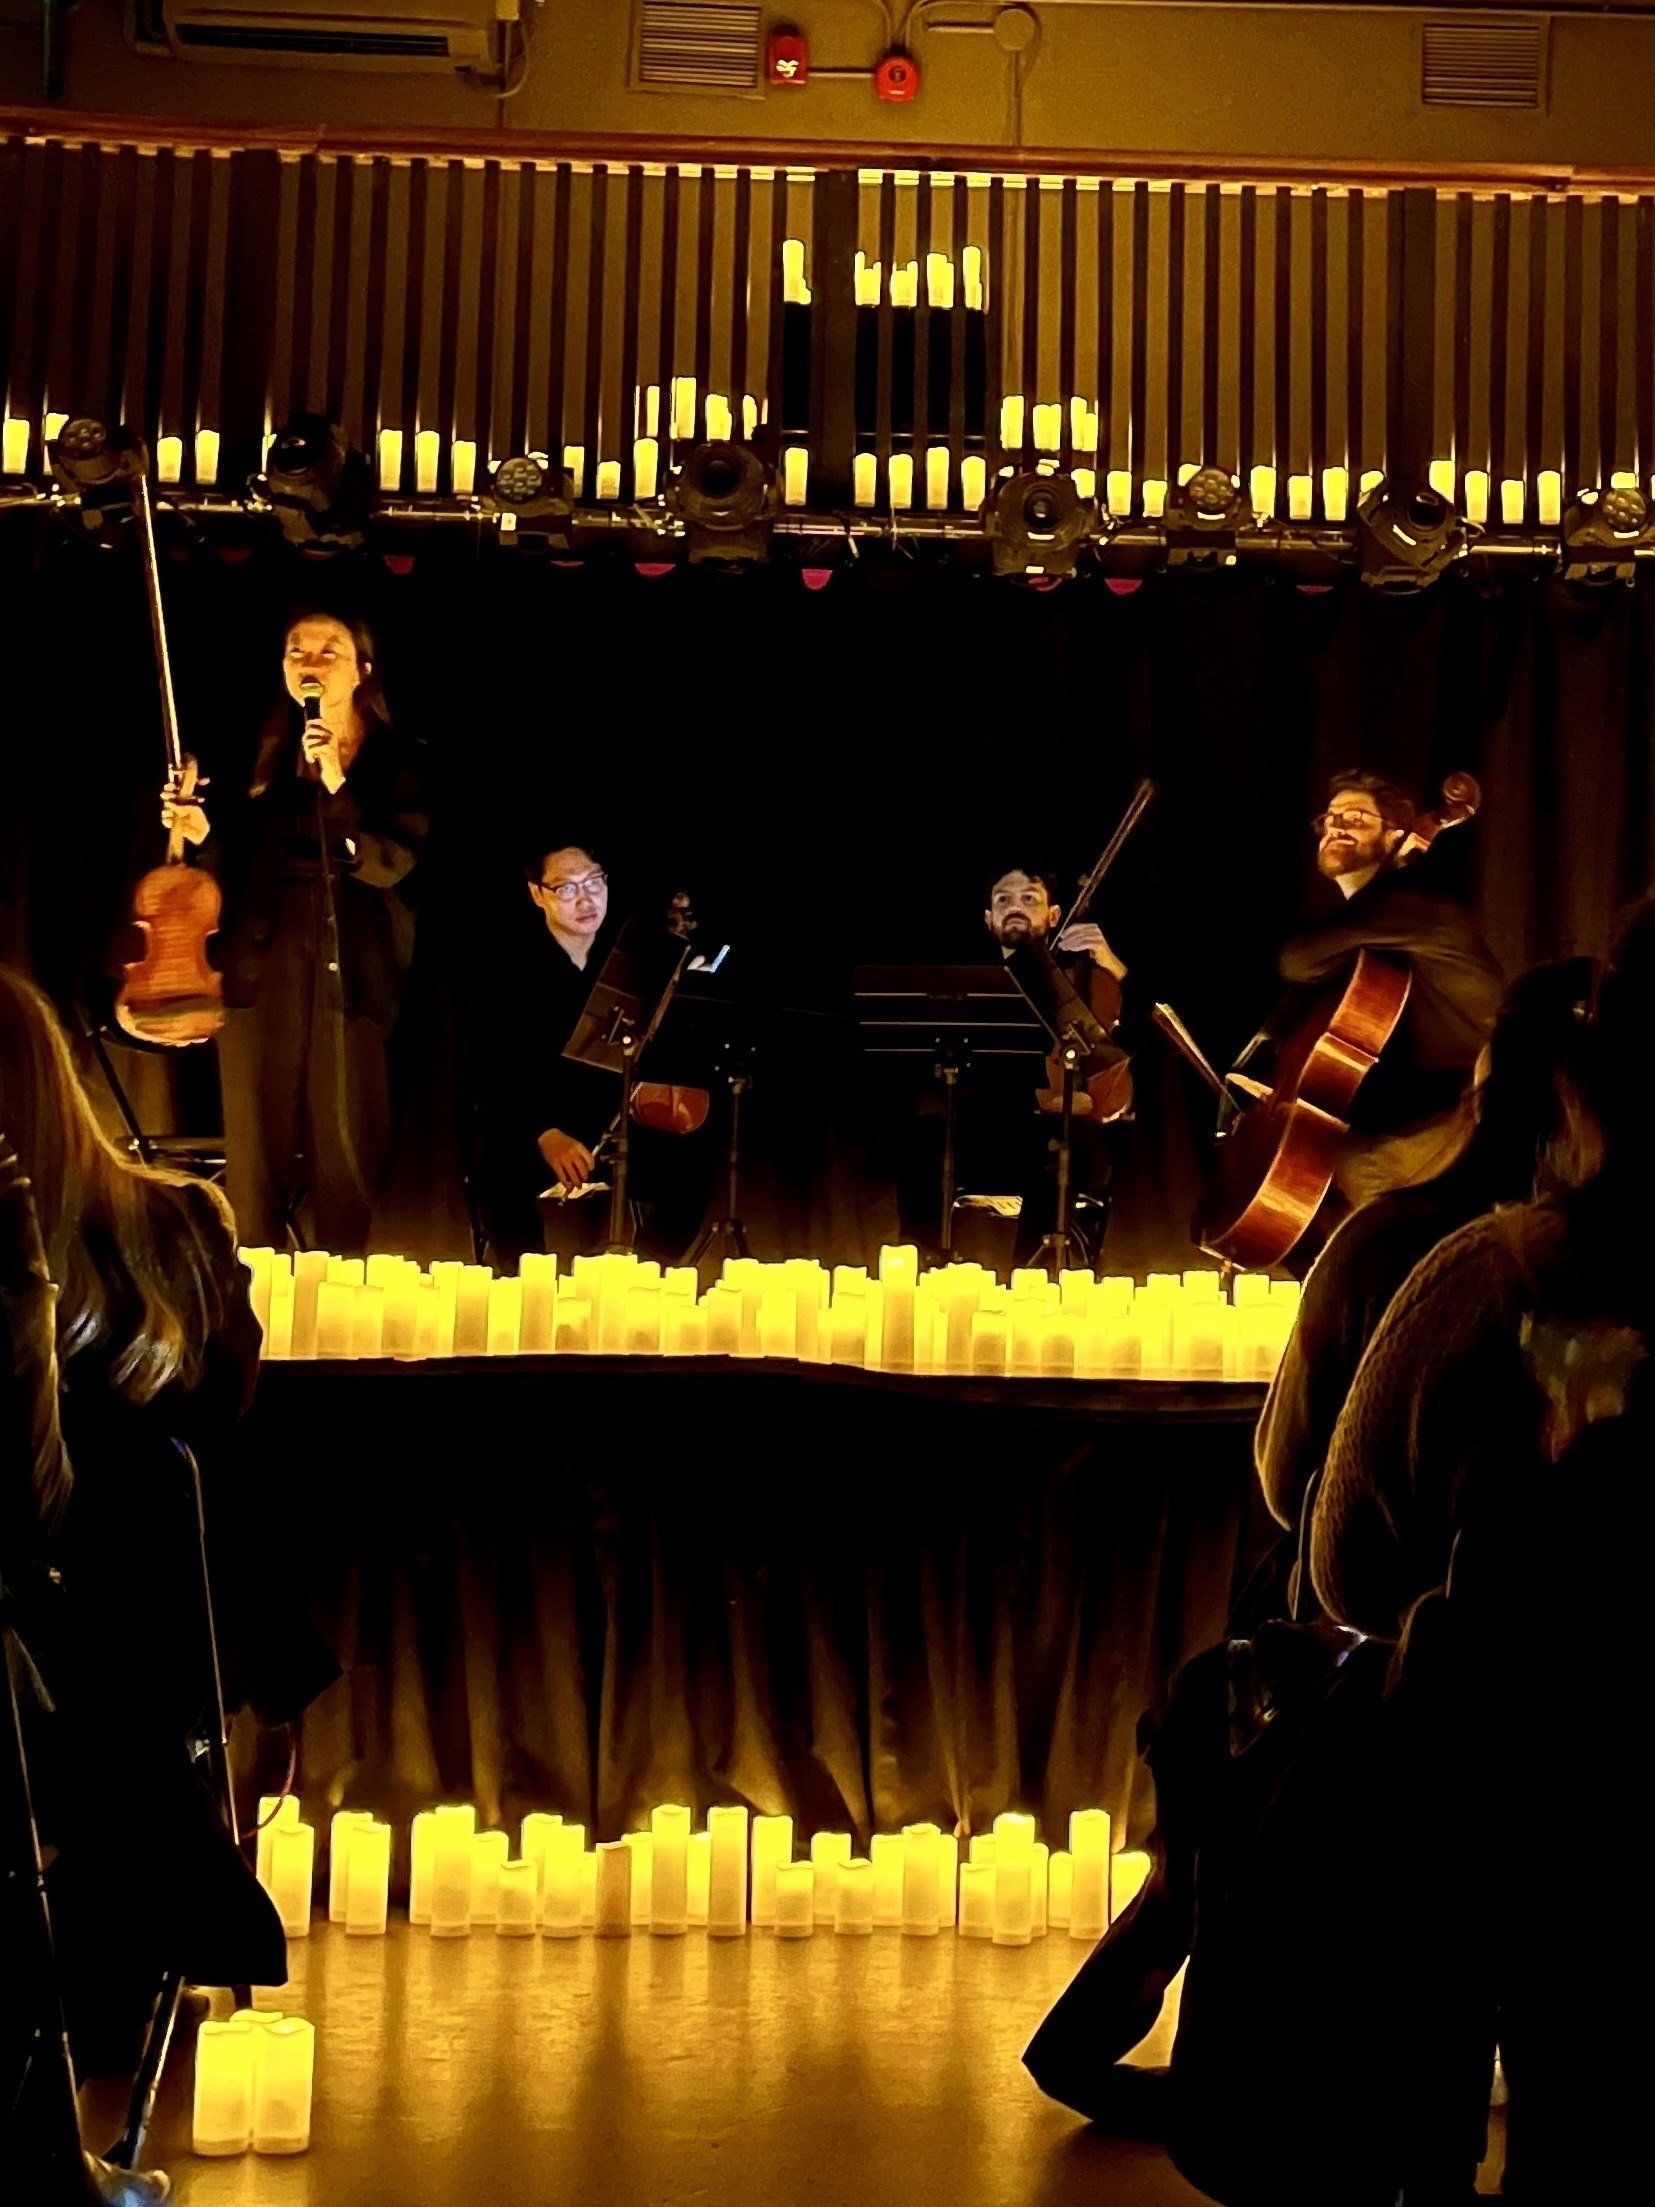 A string quartet up on stage holding their instruments while surrounded by candles